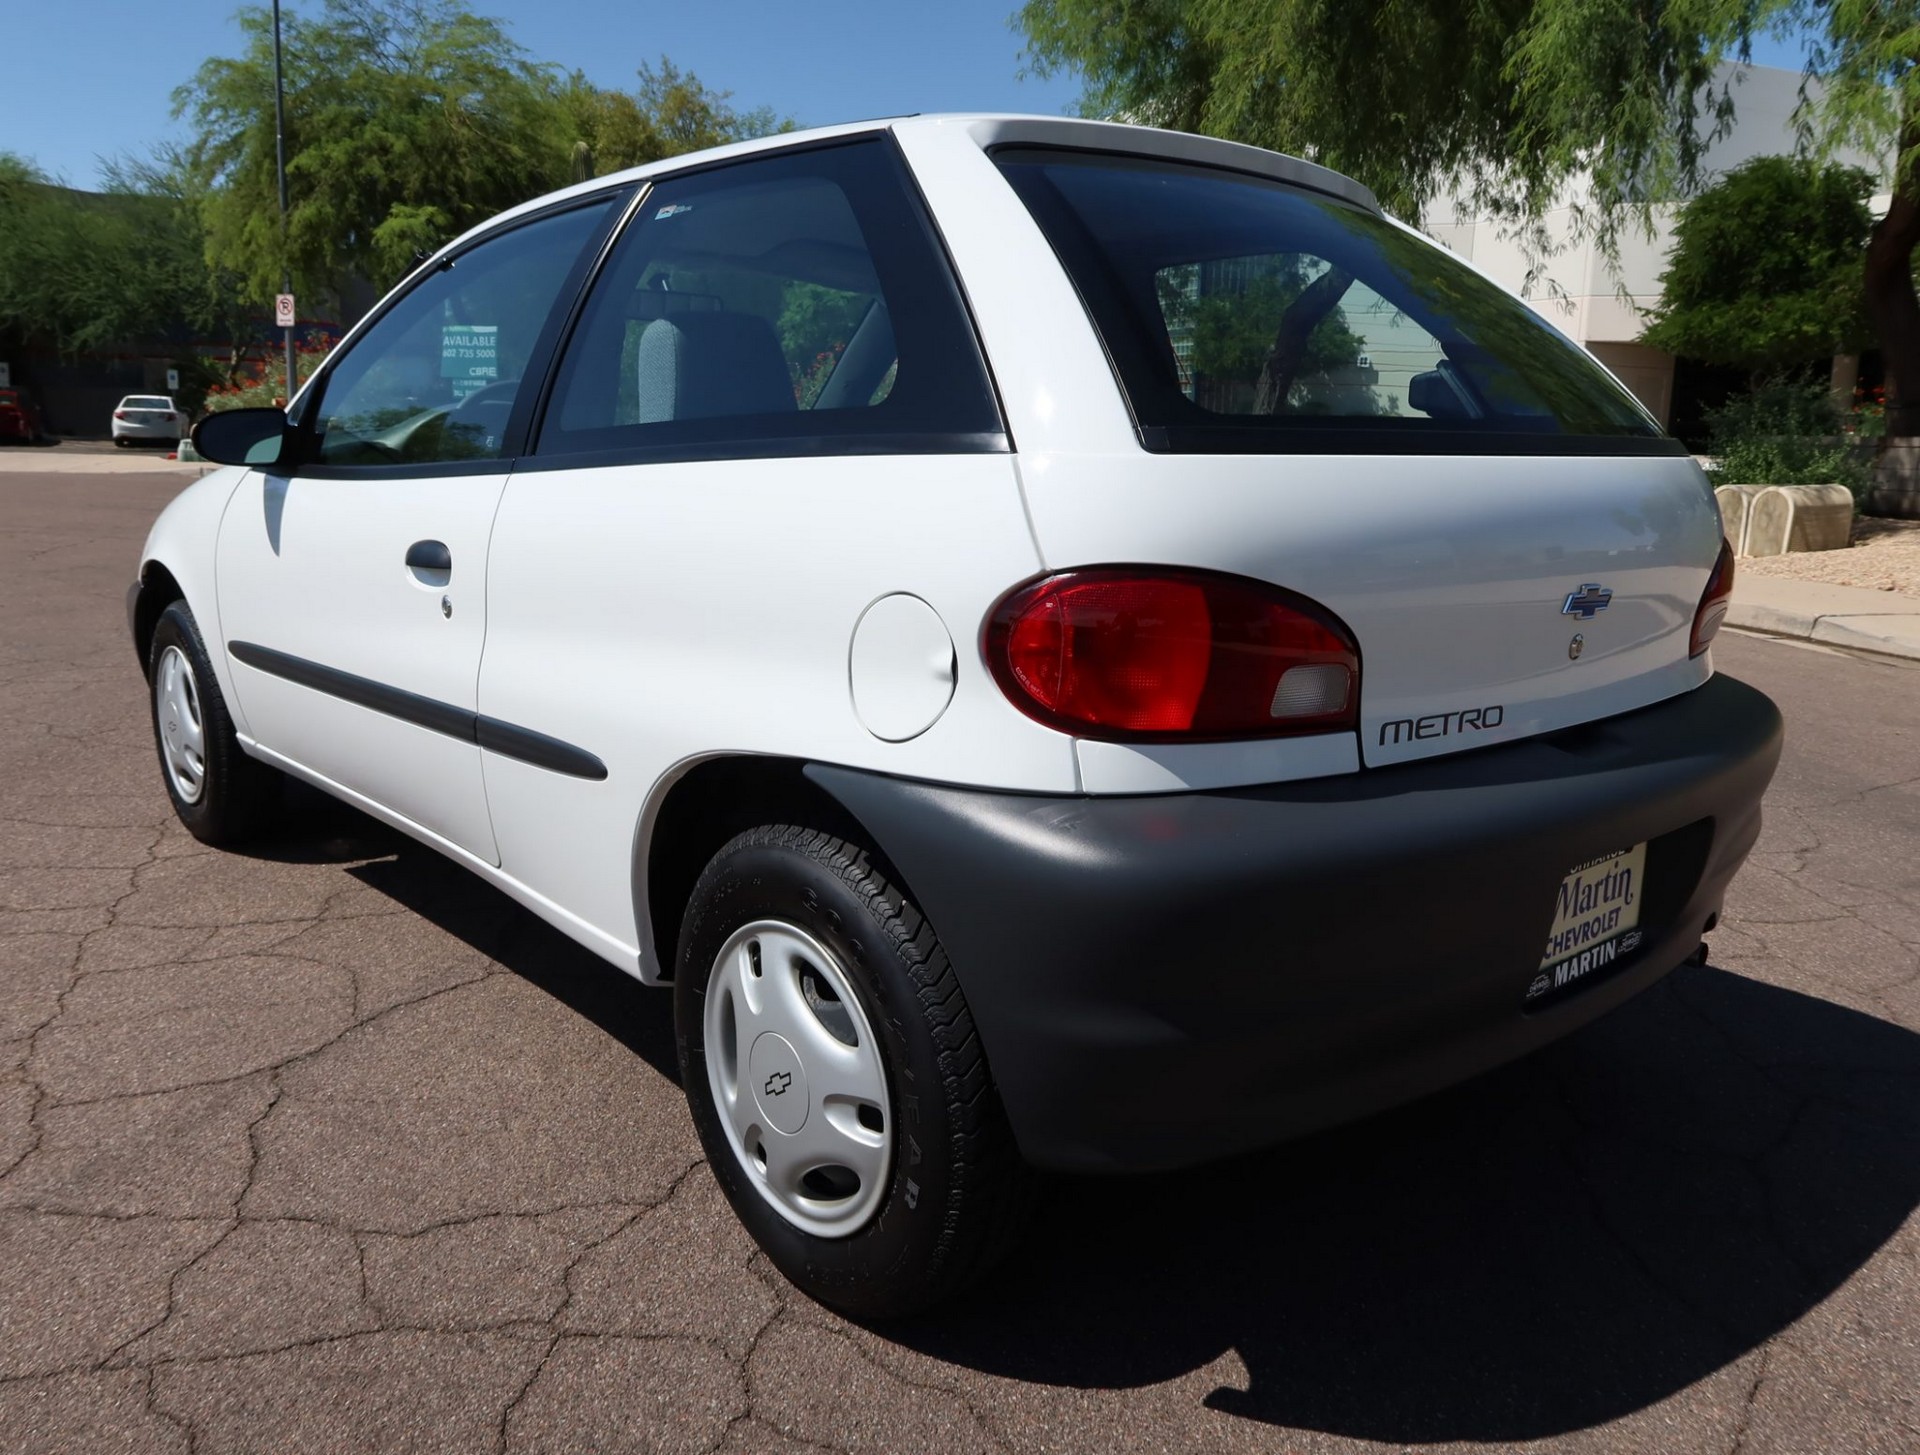 This 400 Mile Chevy Metro Hatchback Is An Economy Car Time Capsule From  2000 | Carscoops